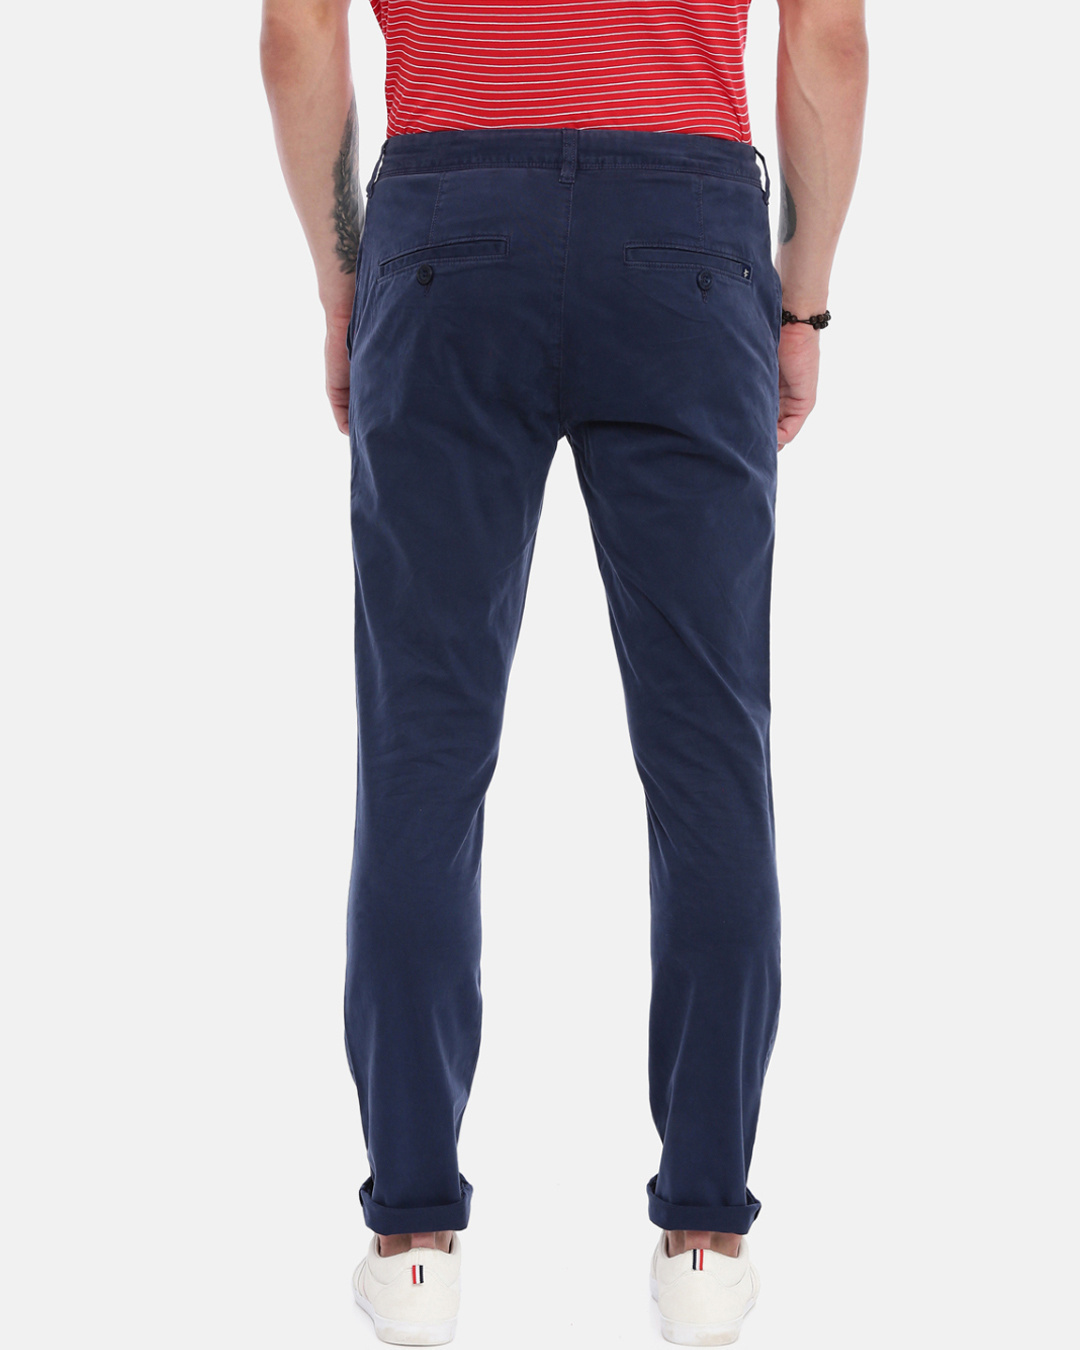 Shop Men Solid Casual Chino-Back